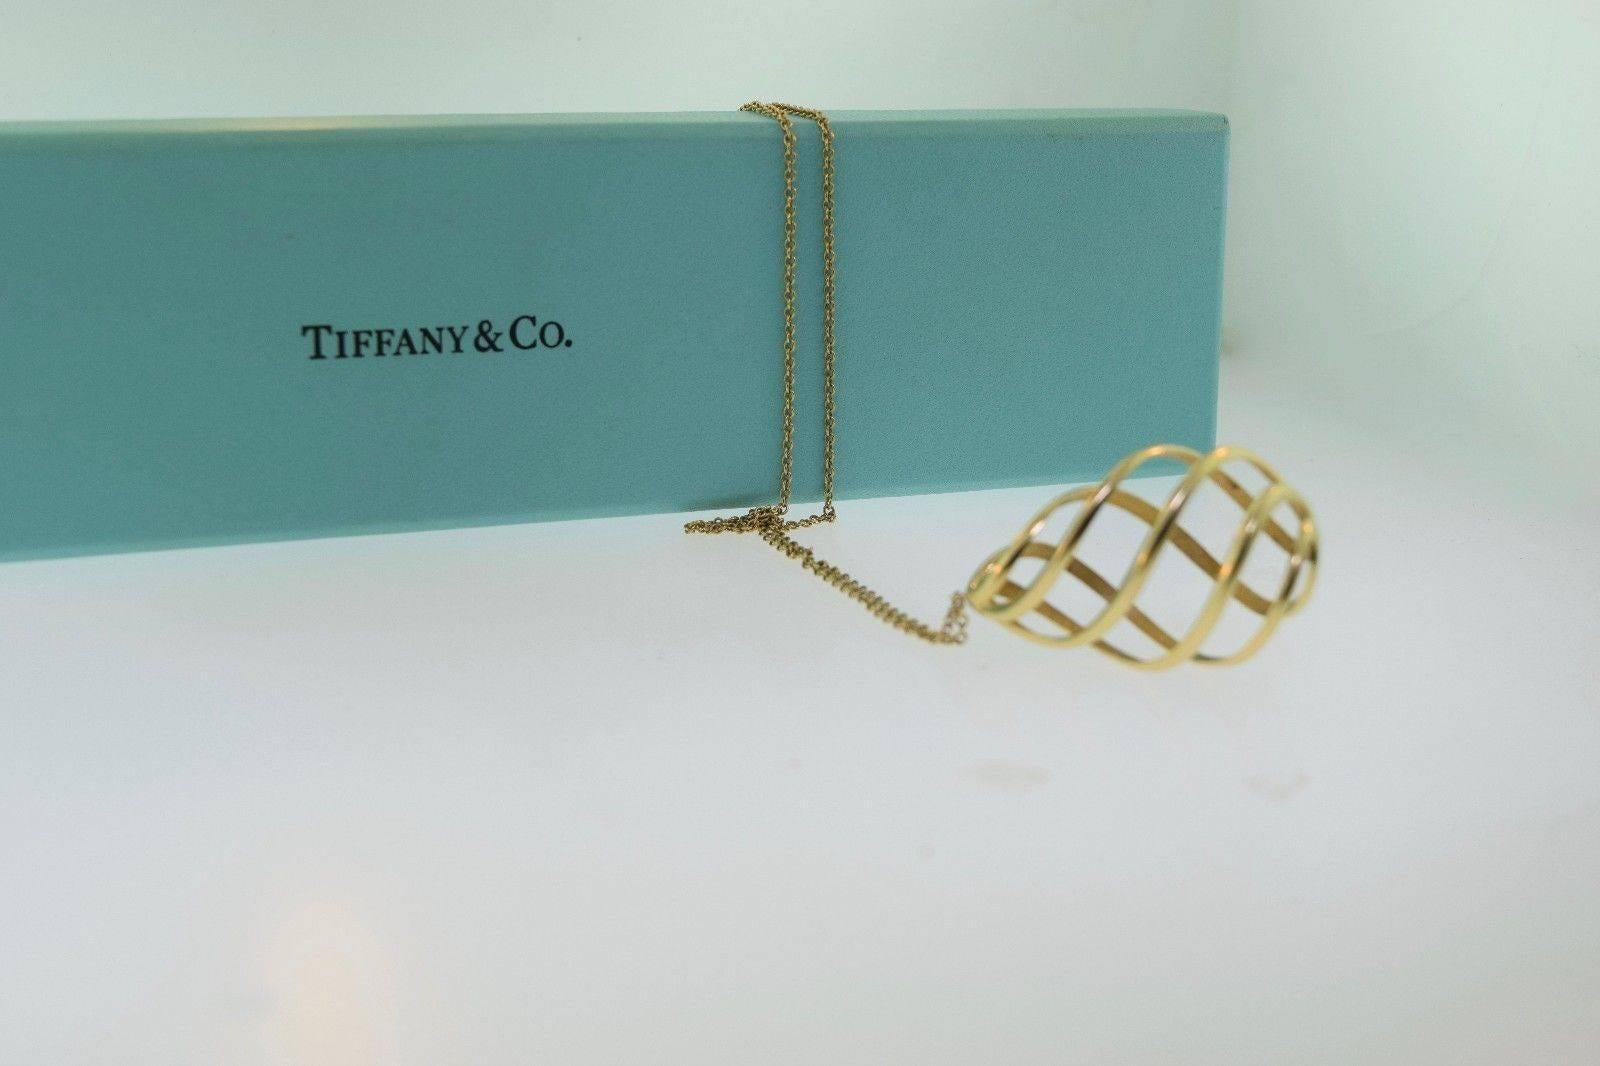 Description: 

18K yellow gold spiral necklace signed and designed by the famous Tiffany & Co. Uniquely crafted, and special in design, this piece can be worn as an everyday pendant to add that extra sparkle to your outfit. Contains TWO closing